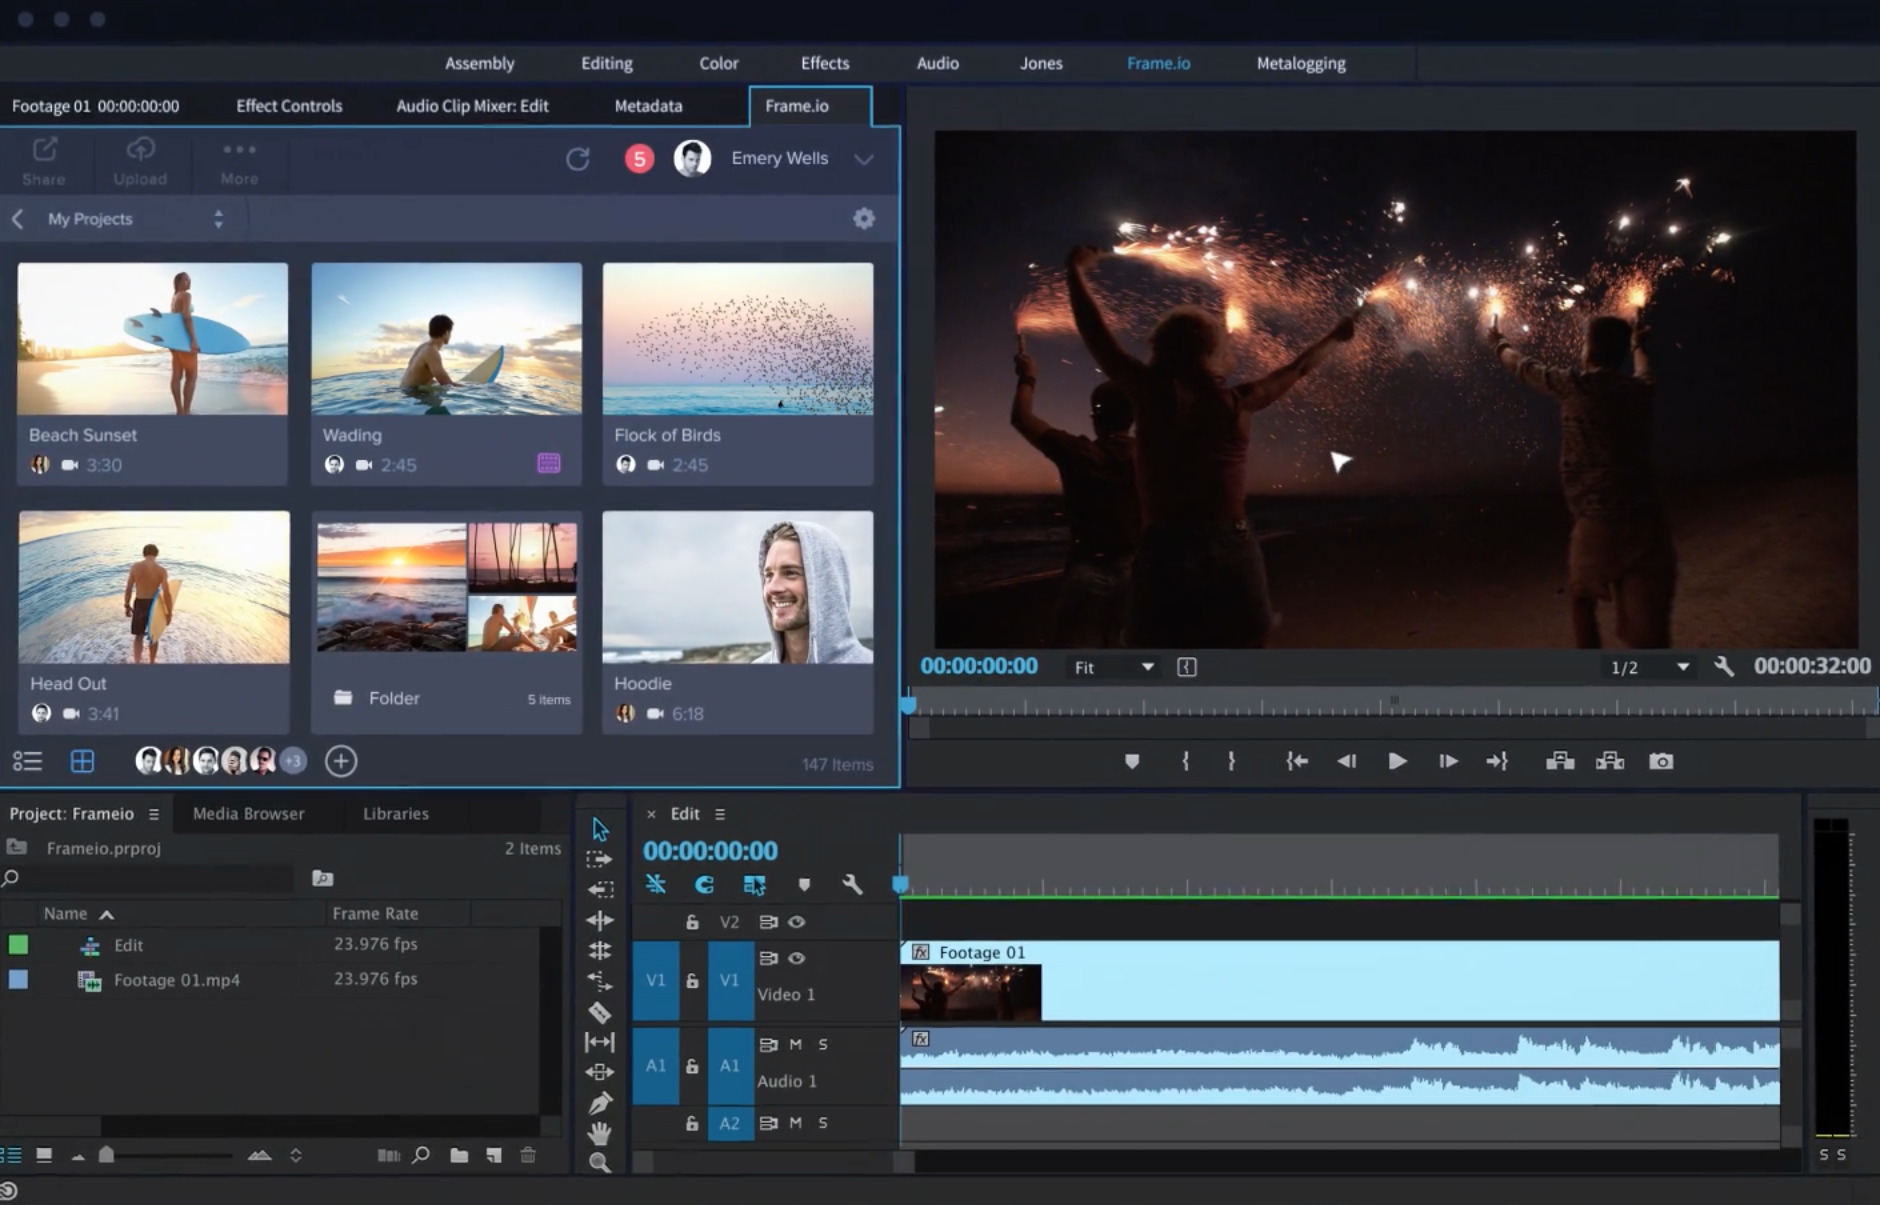 Frame.io to allow real-time collaboration within Adobe Premiere Pro ...